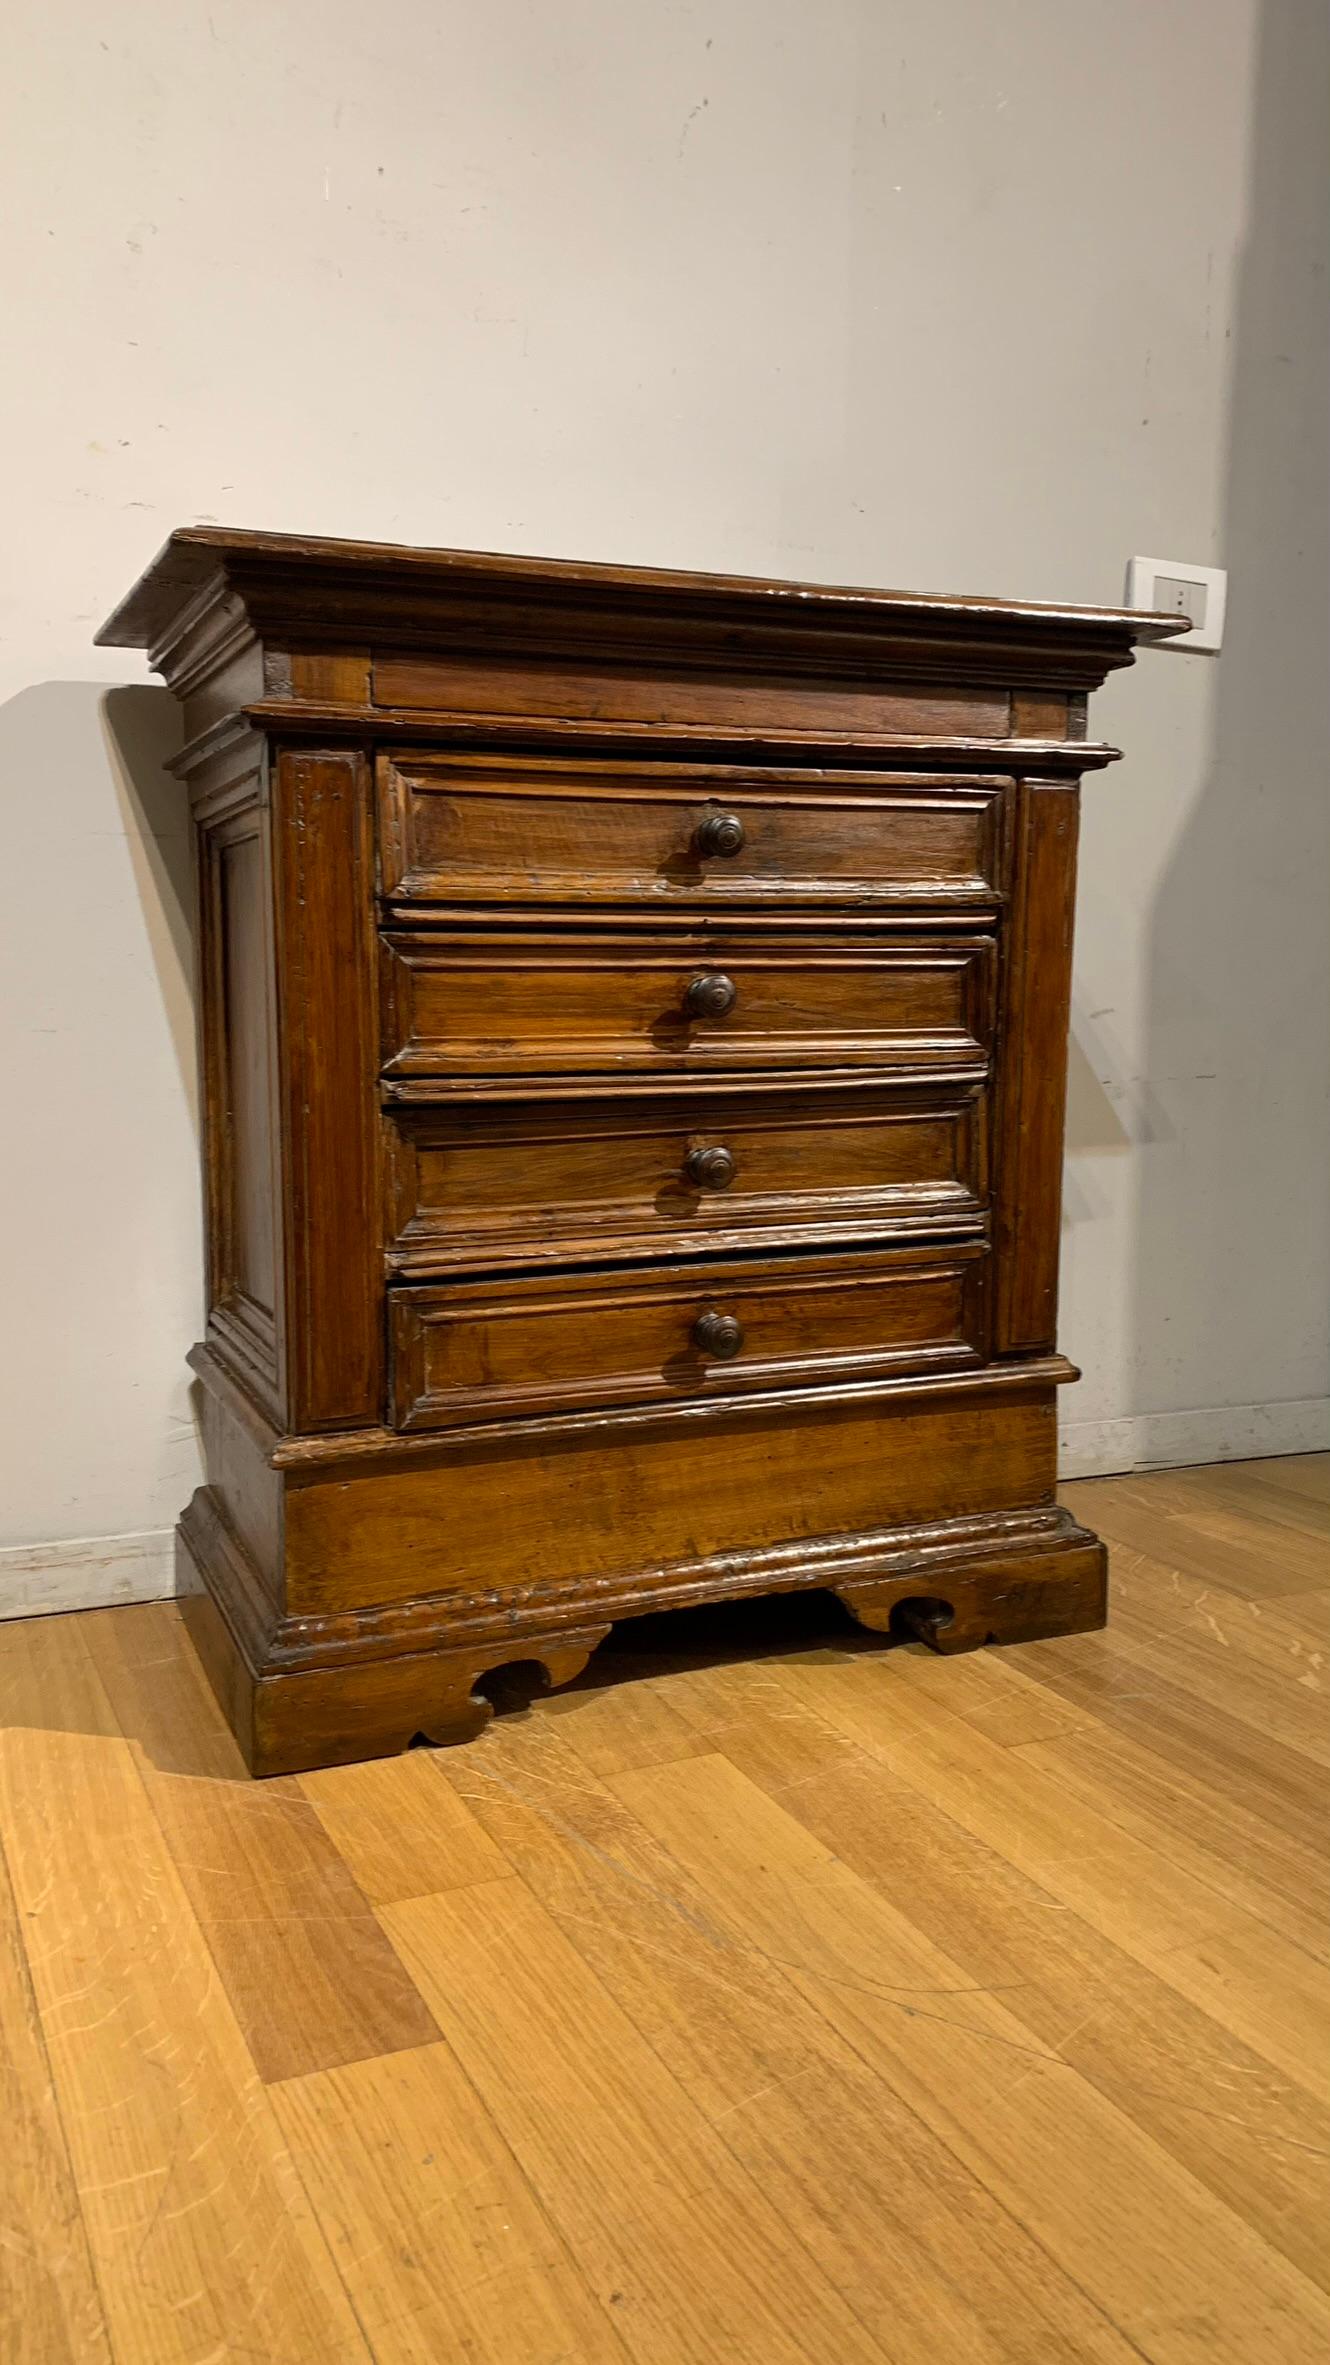 Beautiful small chest of drawers made in solid walnut. Four drawers with turned wooden knobs, bracket feet.
Particular are the dimensions, unusual for the time for this type of furniture.
Tuscan manufacture from the beginning of the